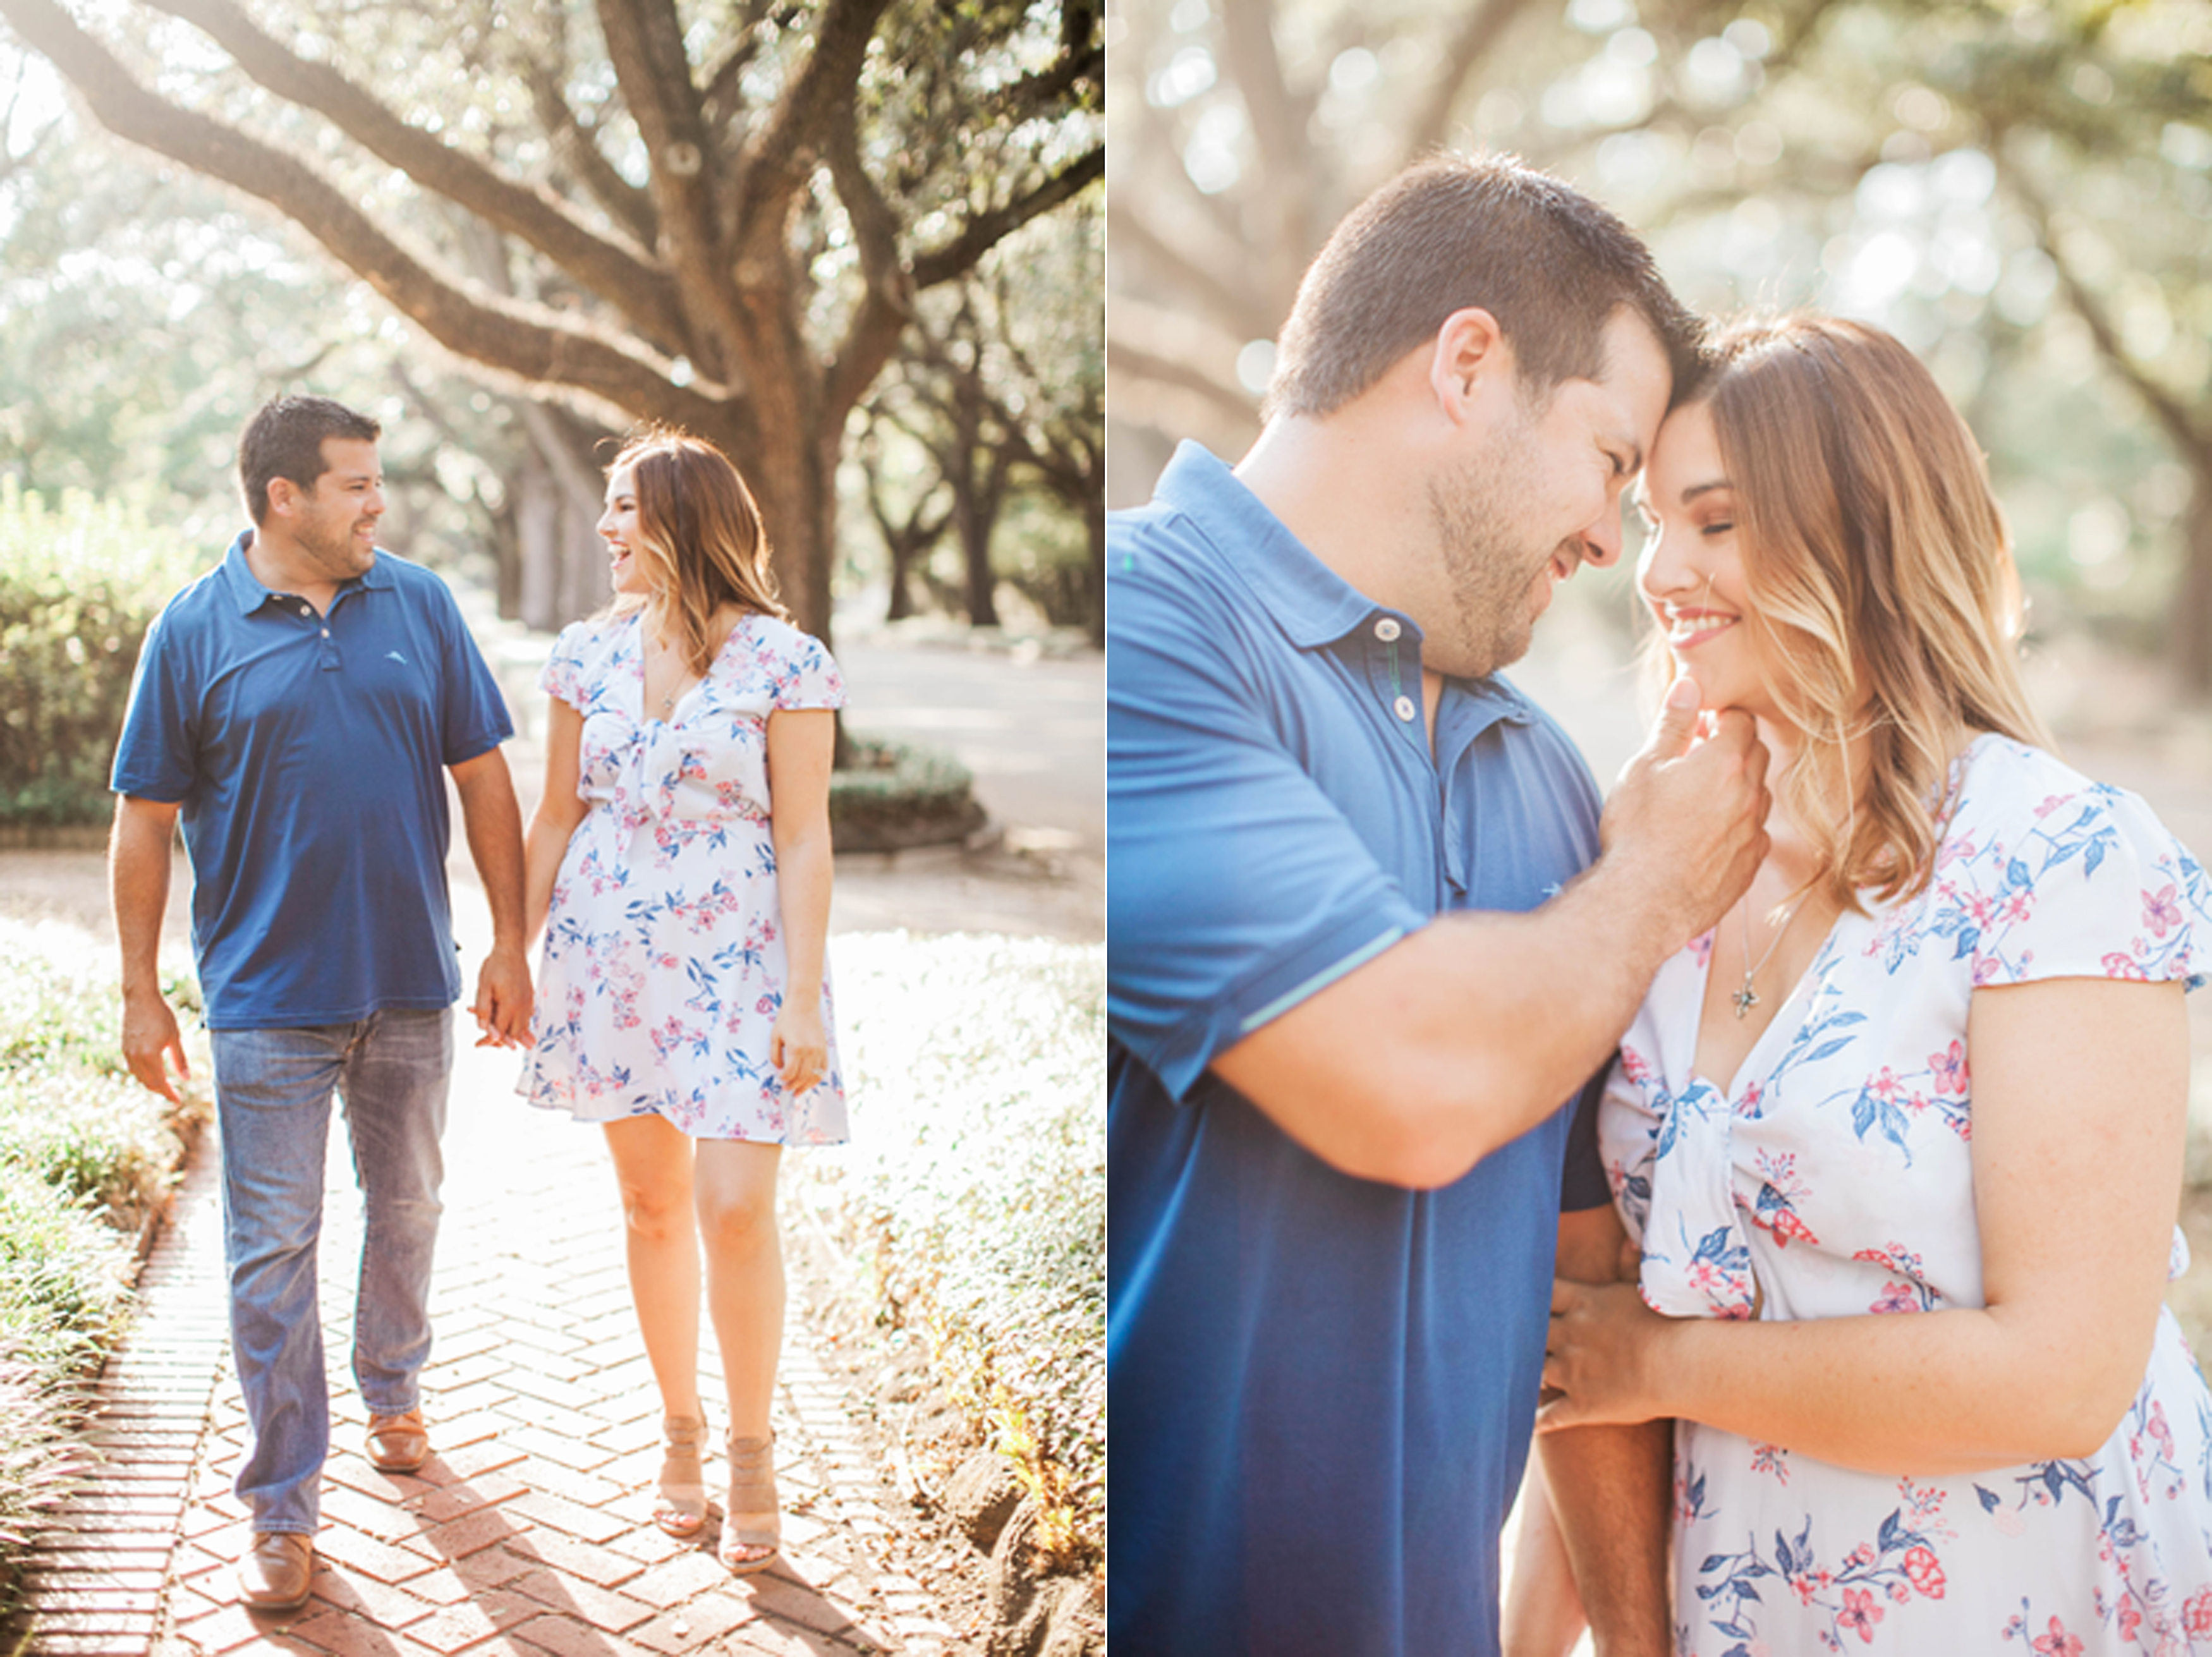 Kyle and Vanessa's Houston Engagement Session by Nicole Chatham Photography